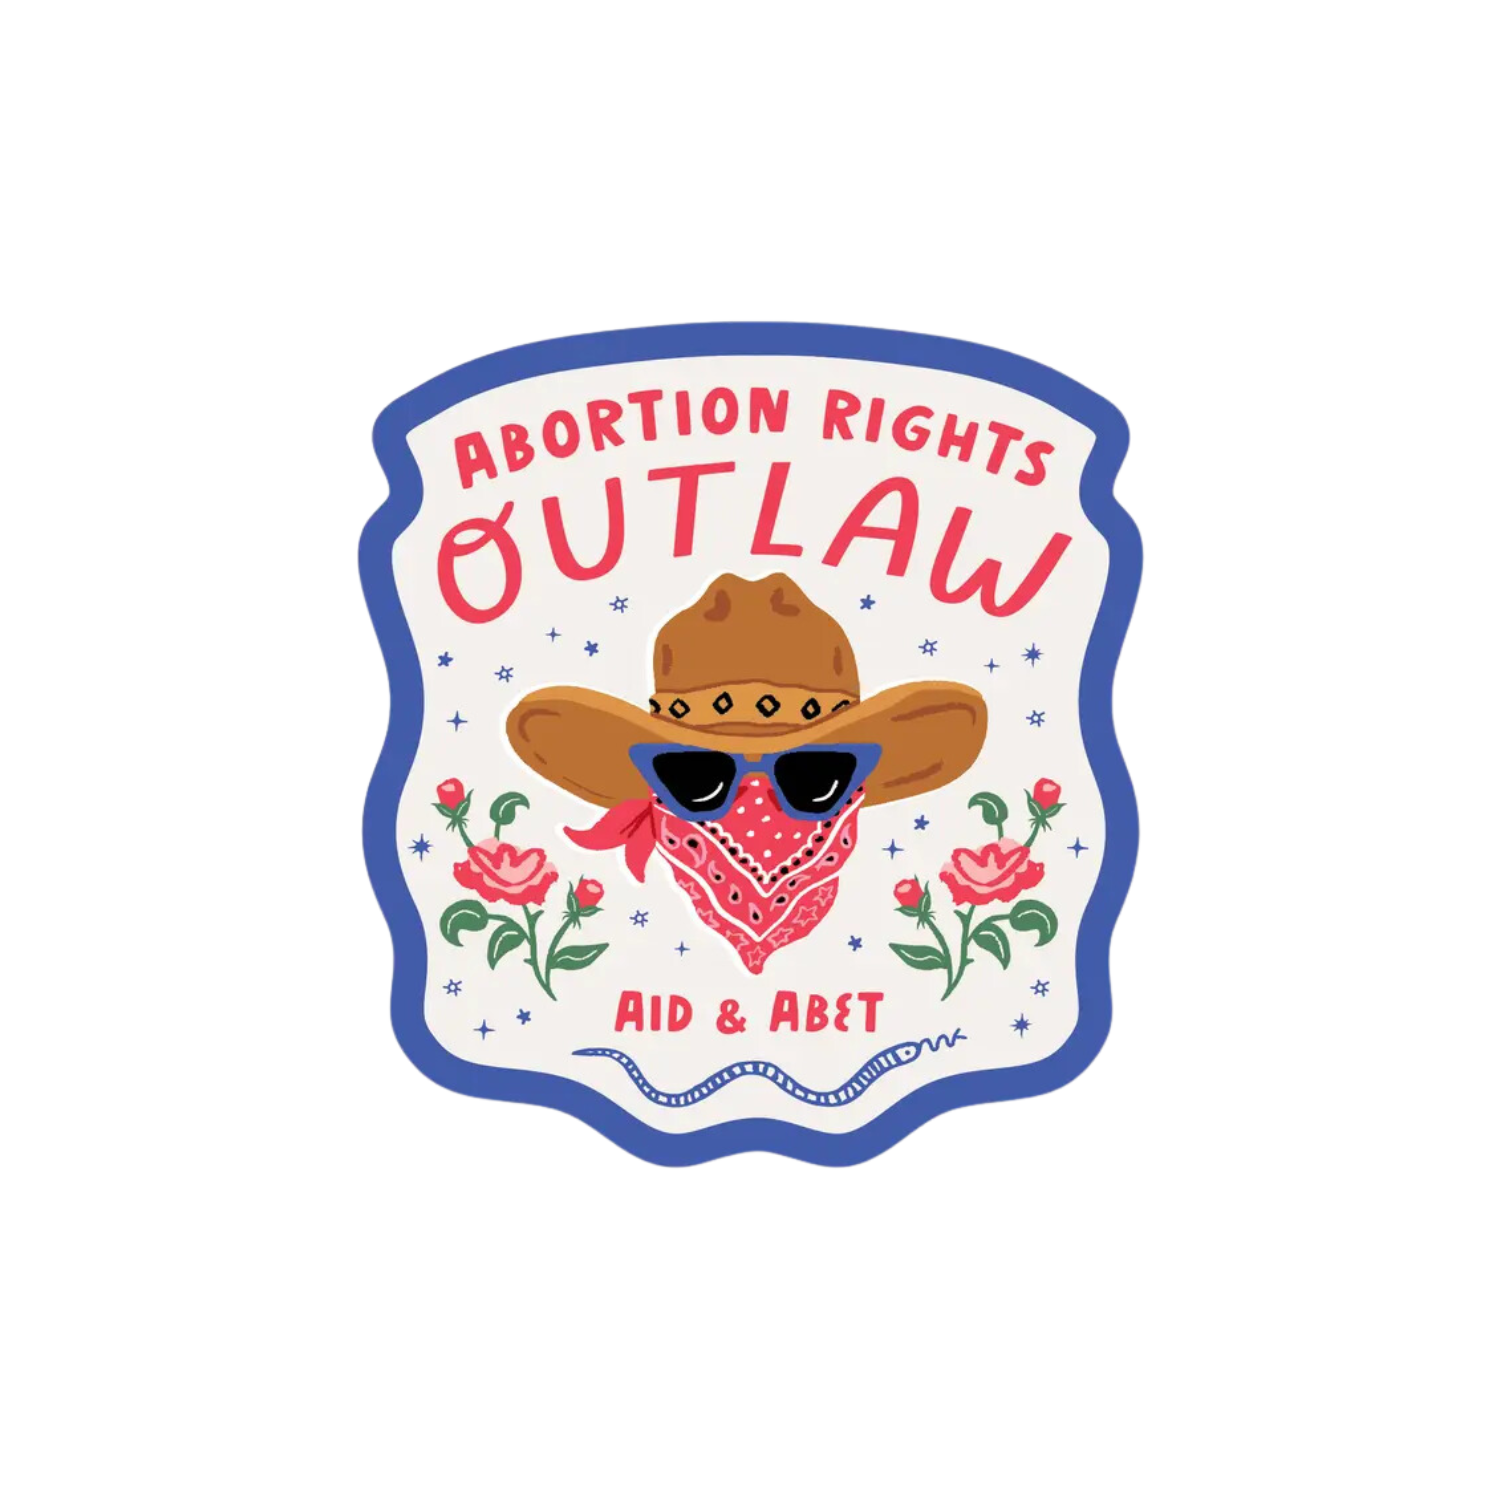 Abortion Rights Outlaw Vinyl Sticker